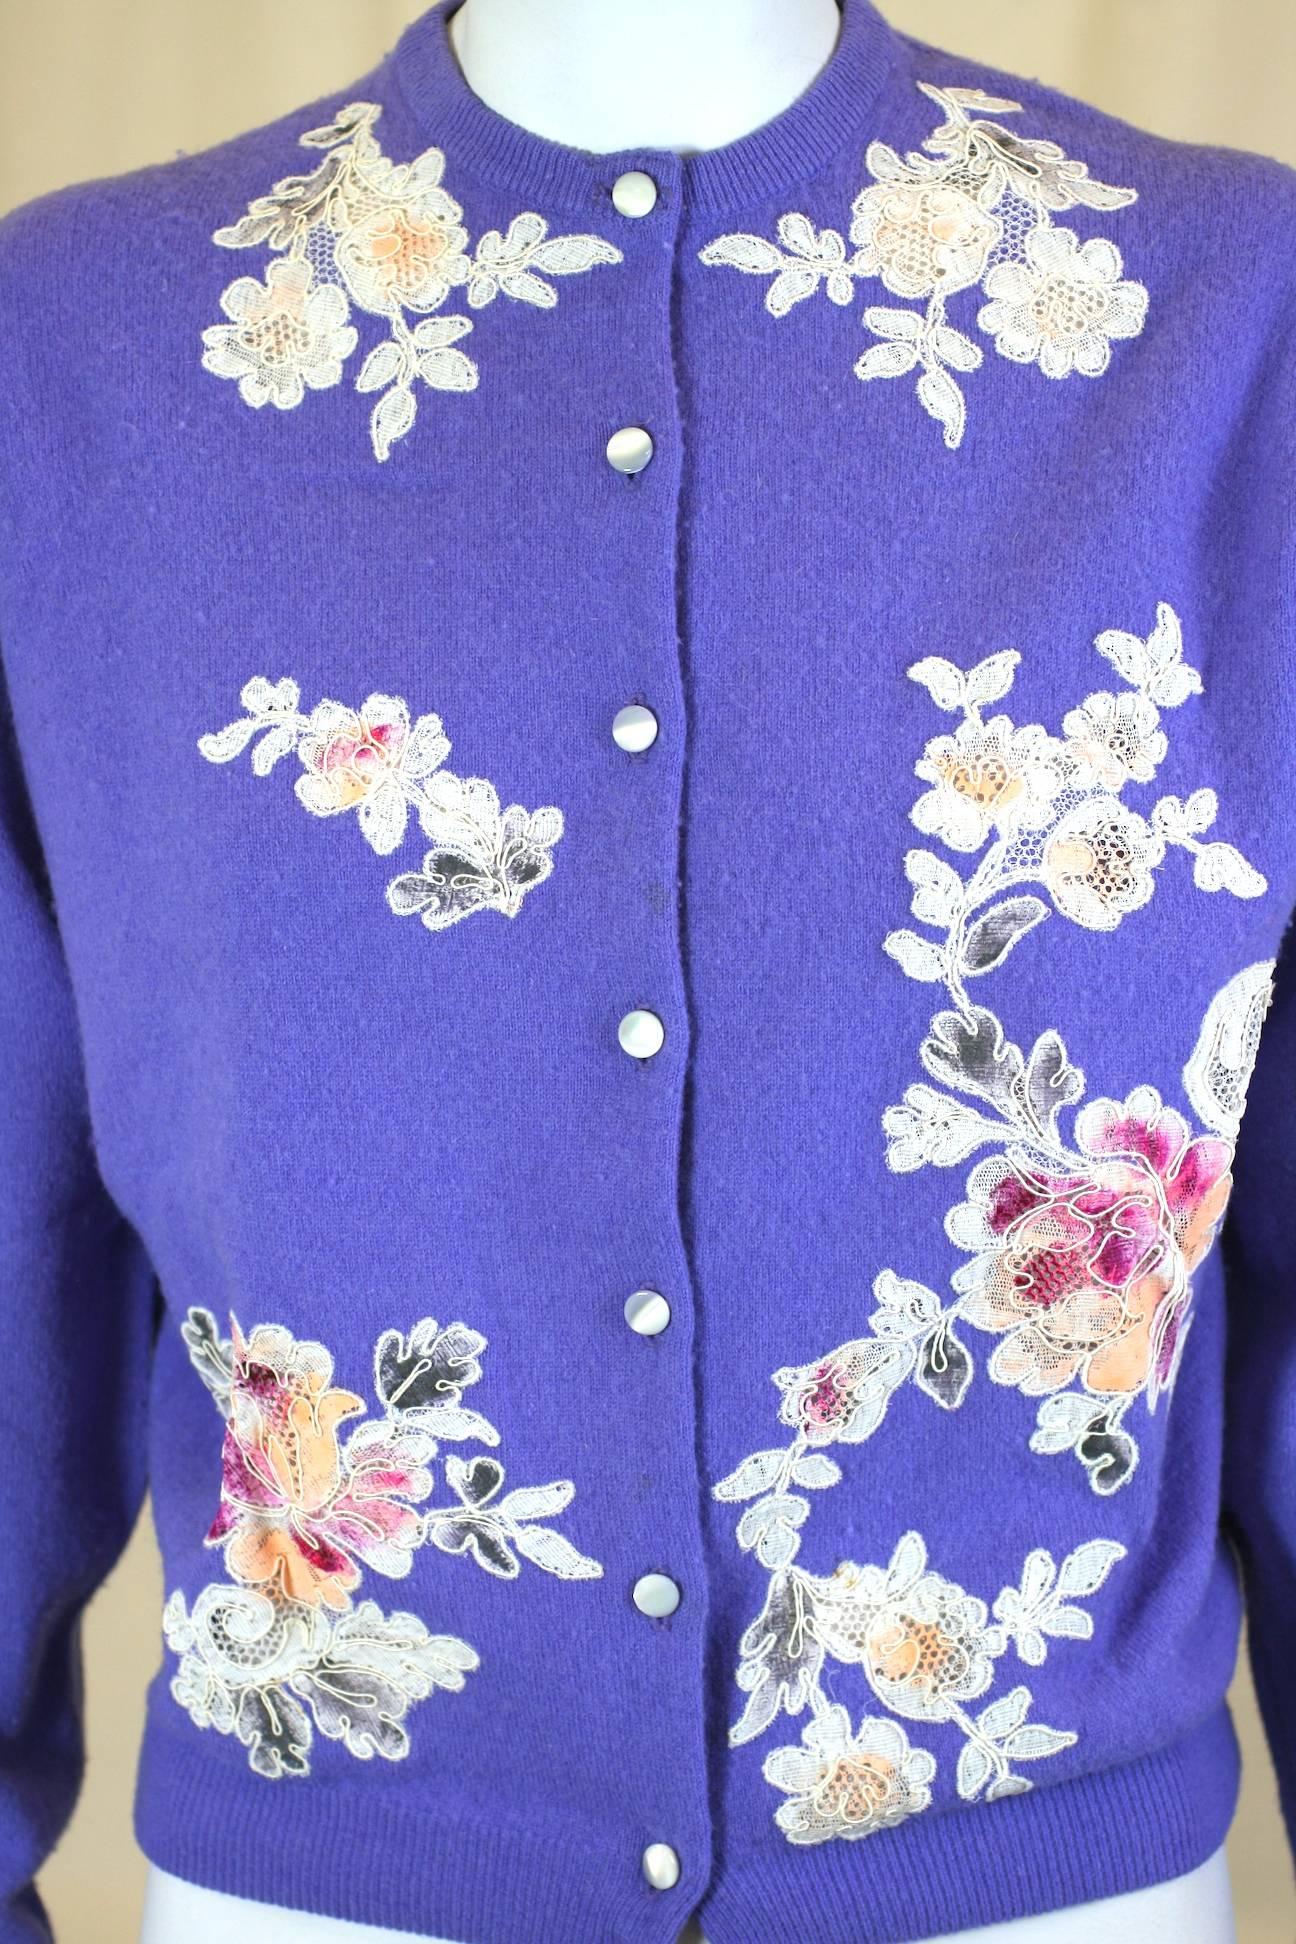 Lovely Purpley blue Cashmere Cocktail Cardigan with lace decoration by Stylecraft of Miami. Hand cut lace appliques are high lighted with colorful hand painting and then applied to the cashmere base. Body lined with pink chiffon with faux mother of